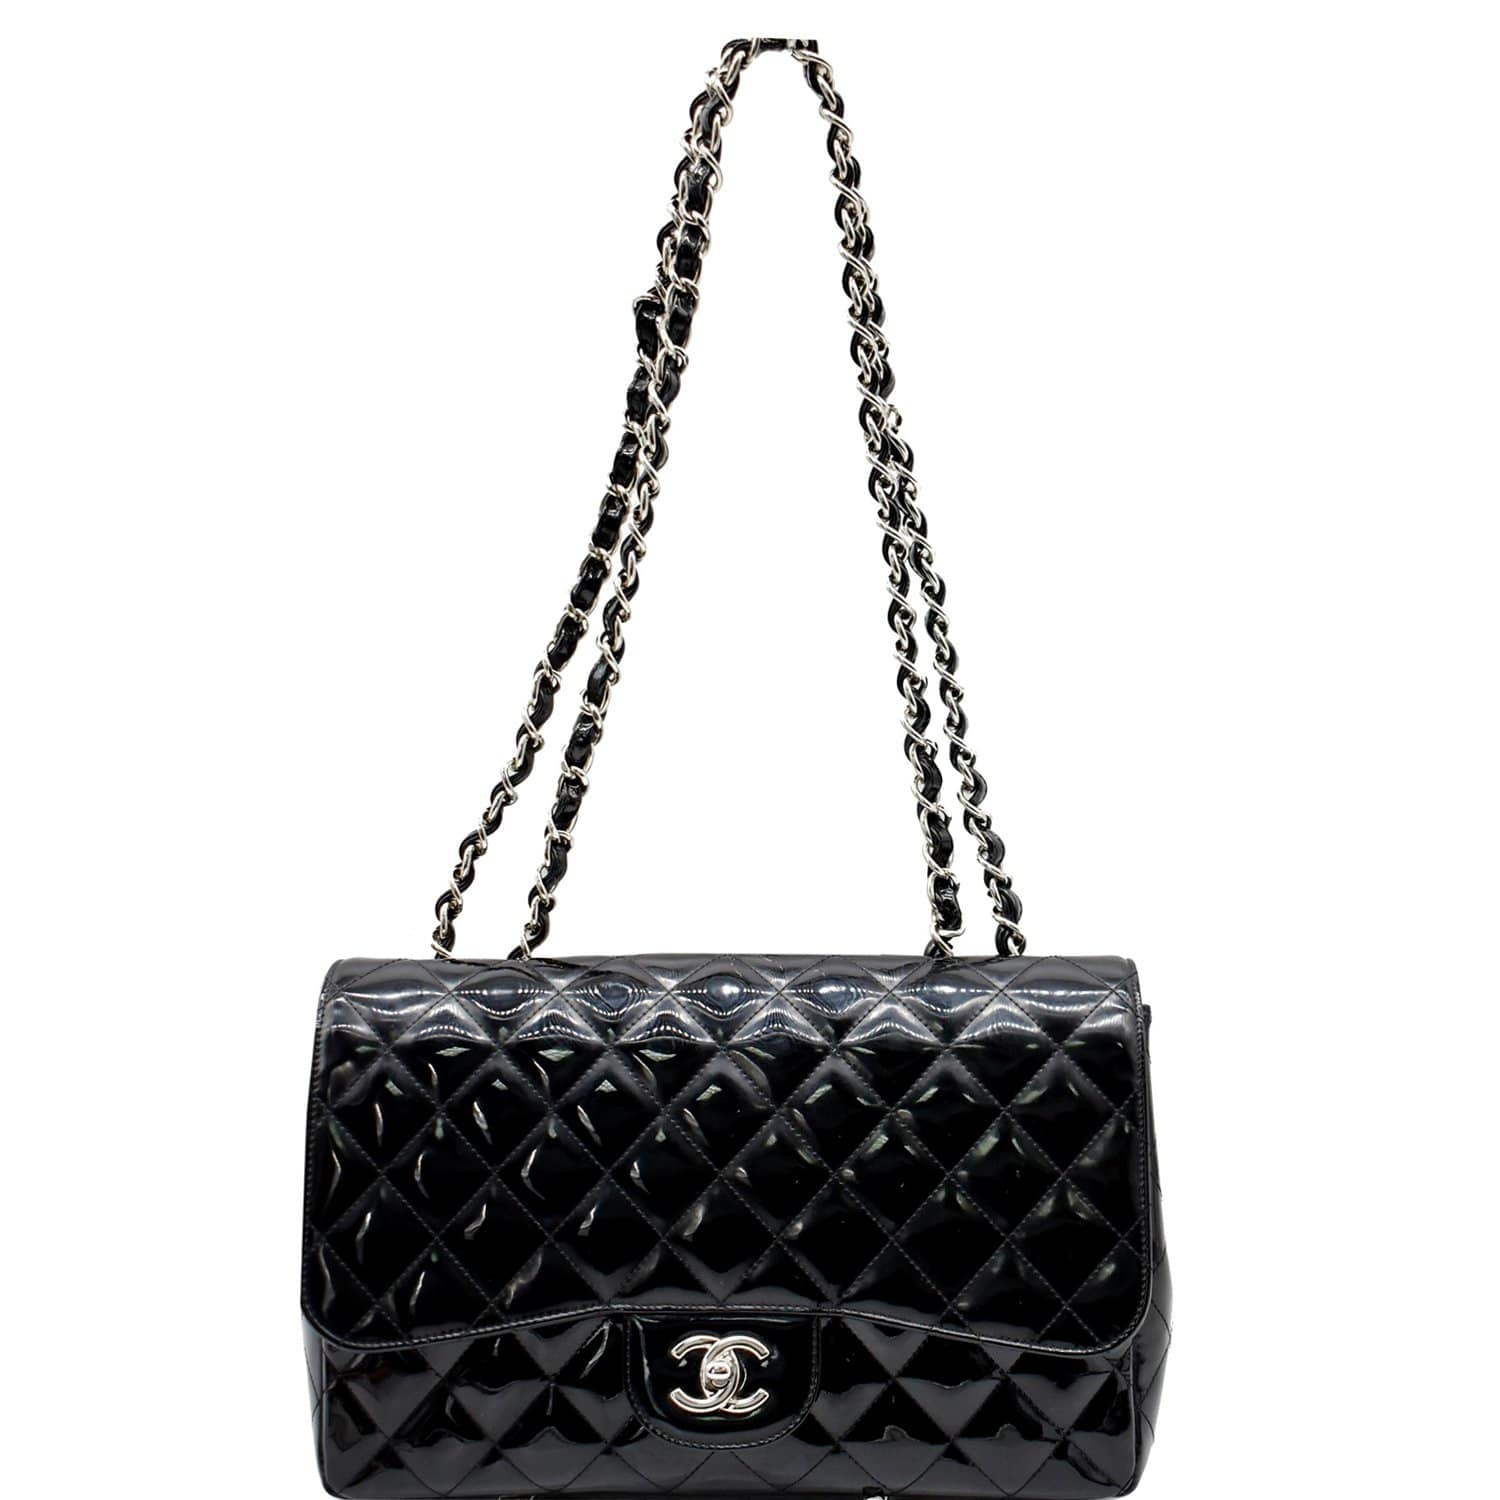 CHANEL, Bags, Used Chanel Pattent Leather Black Crossbody